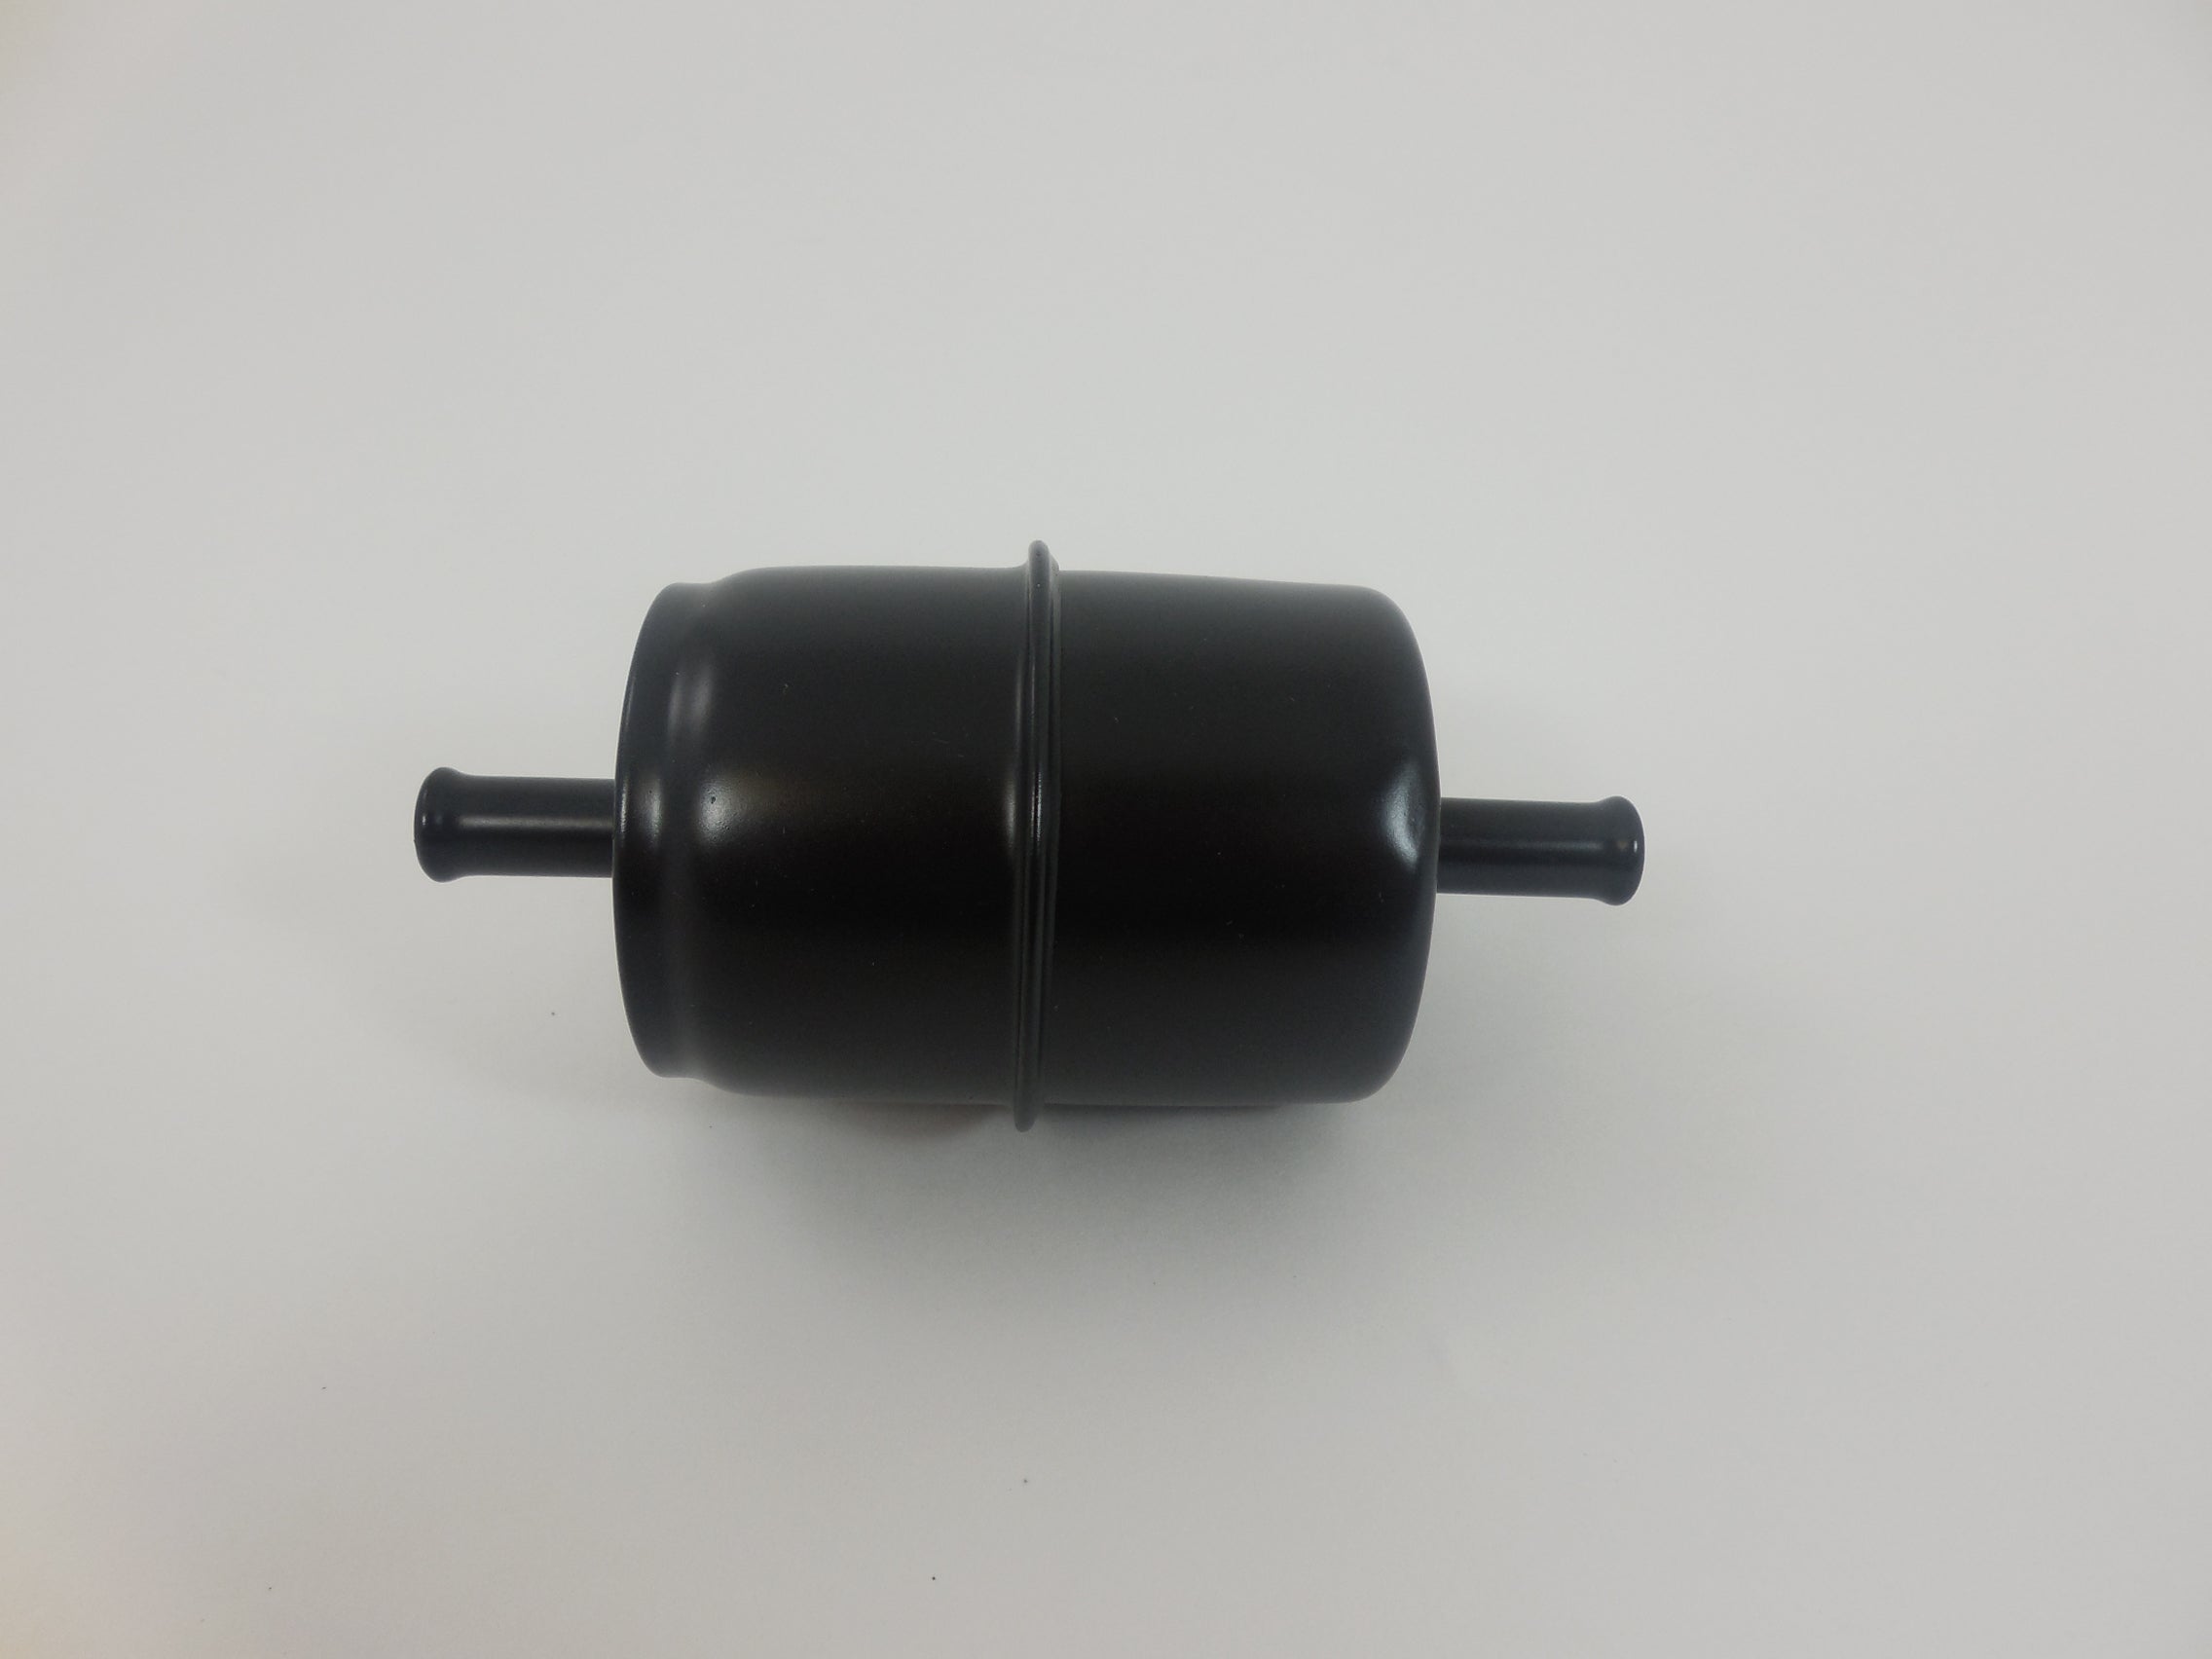 Racing Power Company R9212BK Fuel filter 5/16 inch inlet/outlet - black